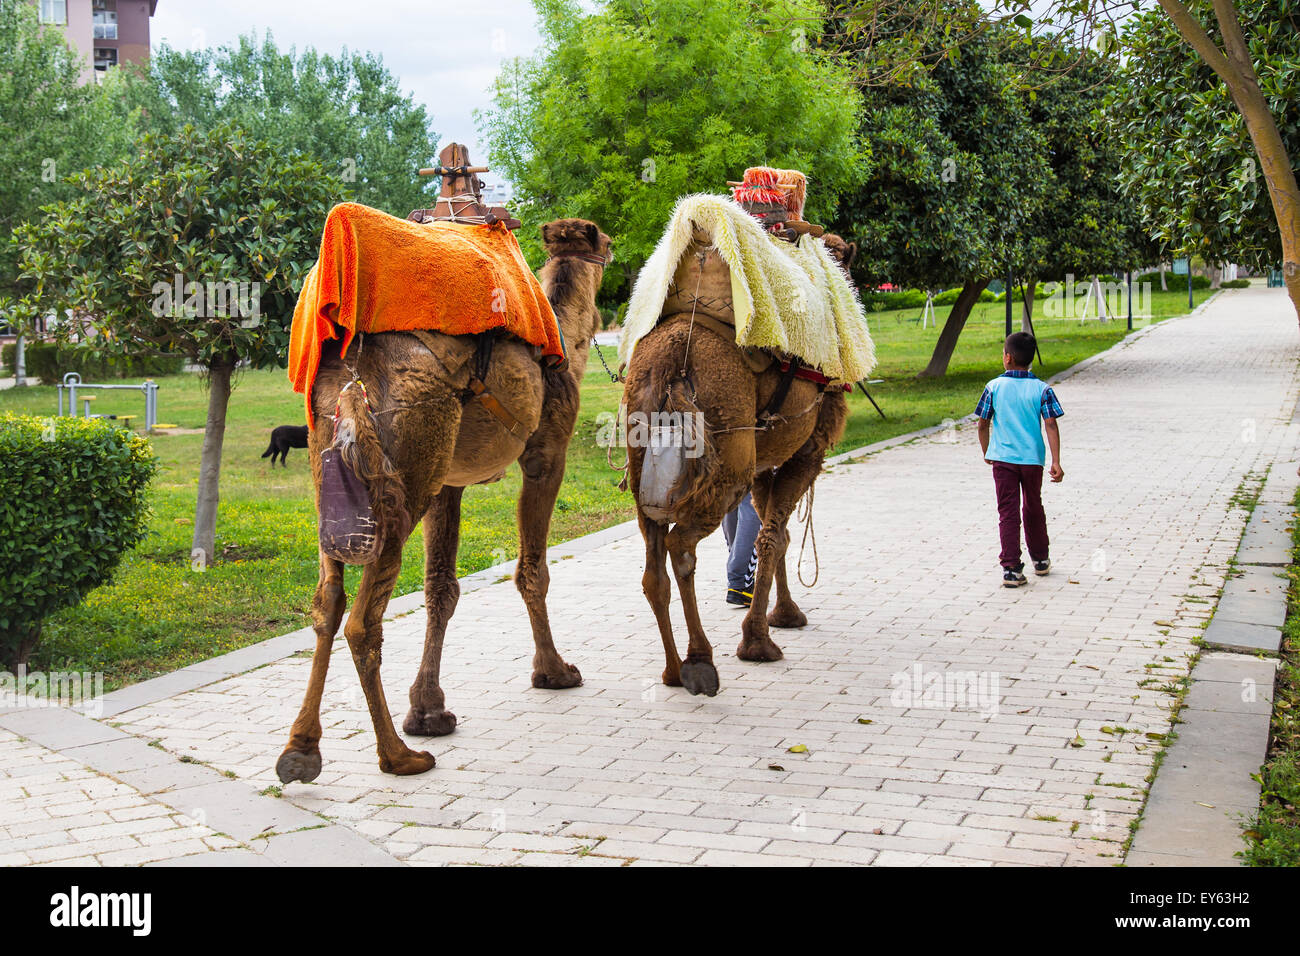 Camels are in the park Stock Photo